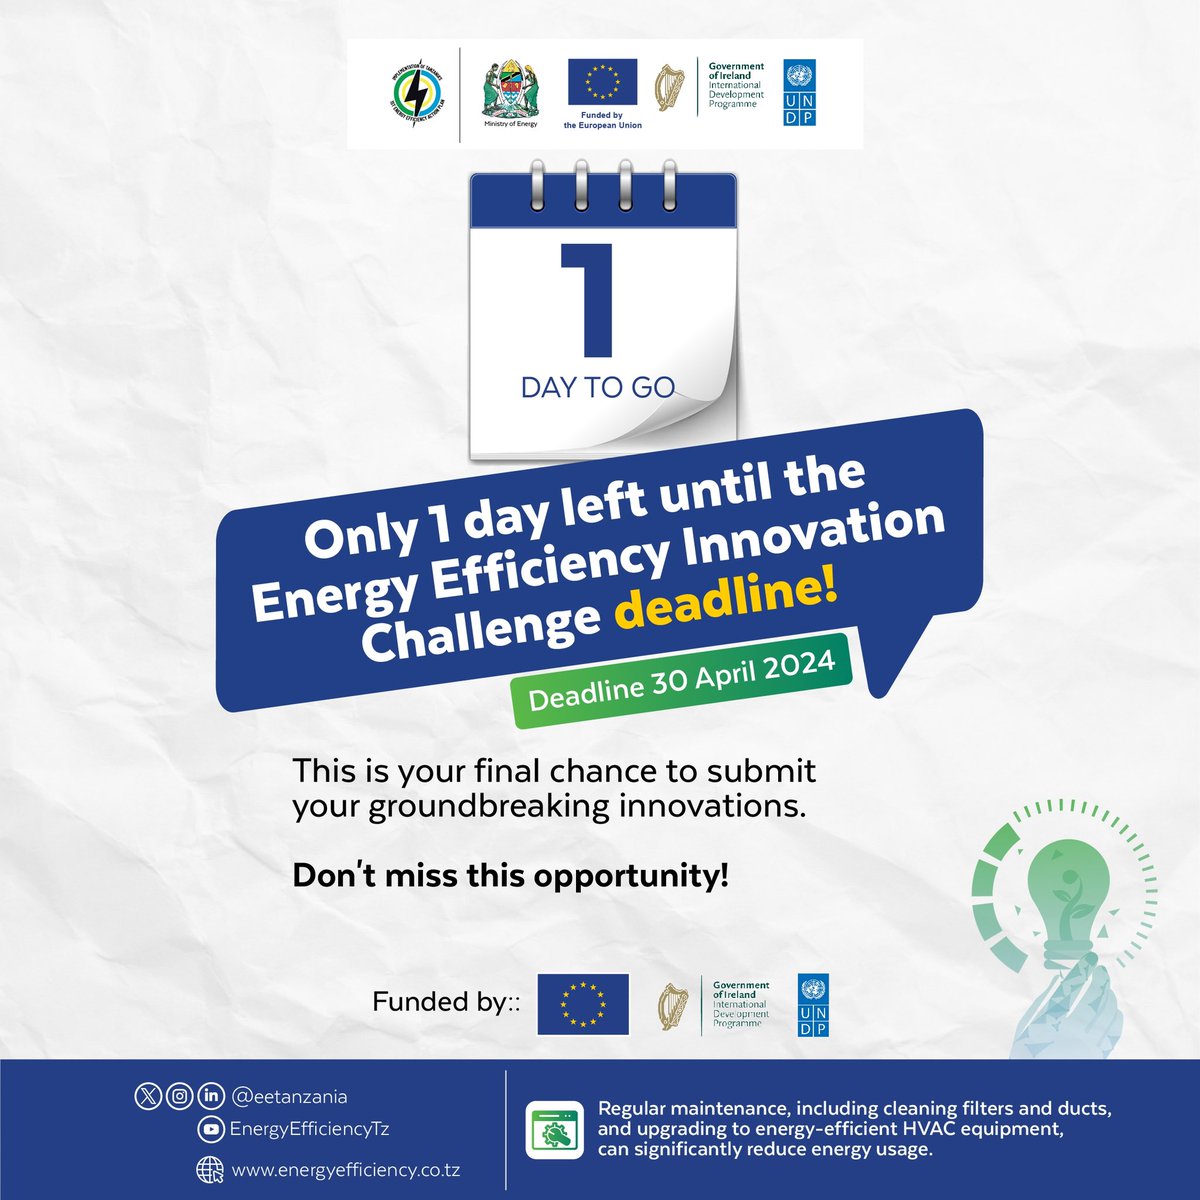 Energy loss from inefficient technologies, processes, and behaviors is a global issue. Join us in promoting sustainability and energy efficiency in our country. Submit your #energyefficiency idea for a more sustainable future at energyefficiency.co.tz. @EUinTZ @undptz